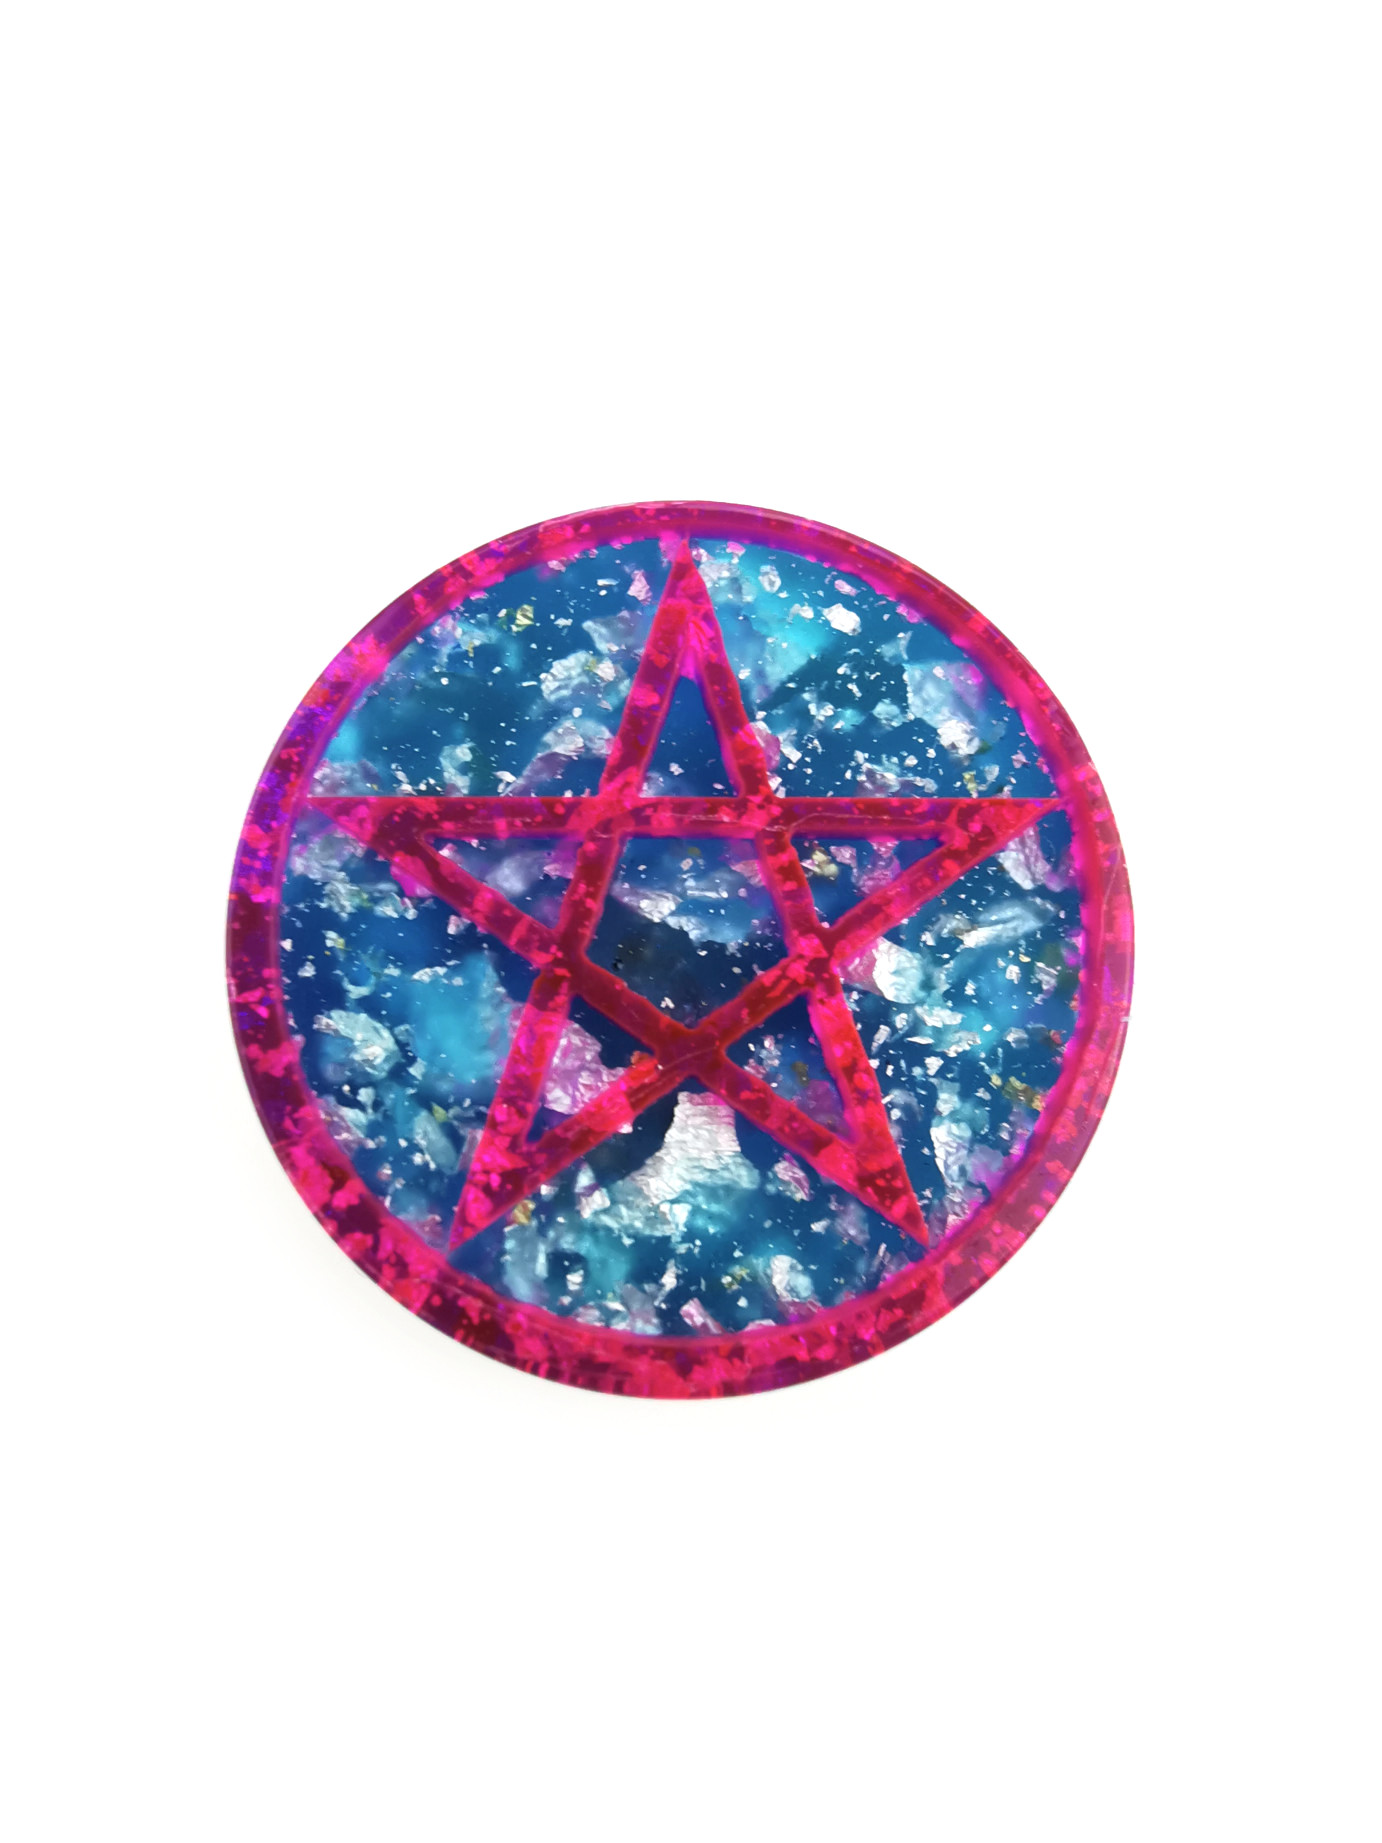 Small Pentagram Orgone Puck in Pink and Blue by OrgoneVibes